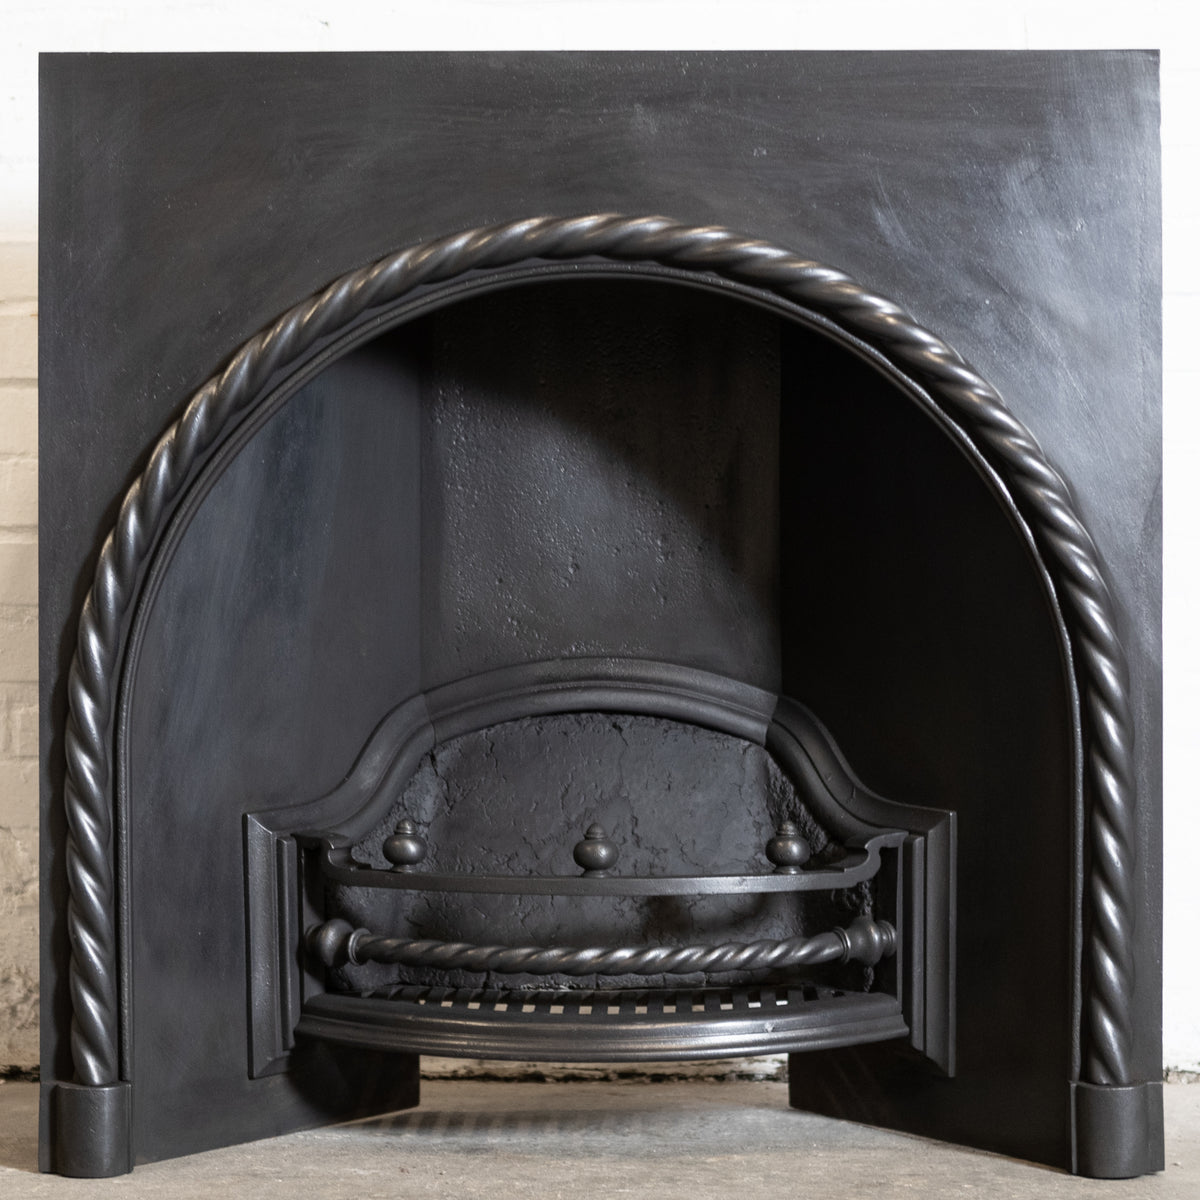 Antique Cast Iron Arched Fireplace Insert with Rope Detail | The Architectural Forum